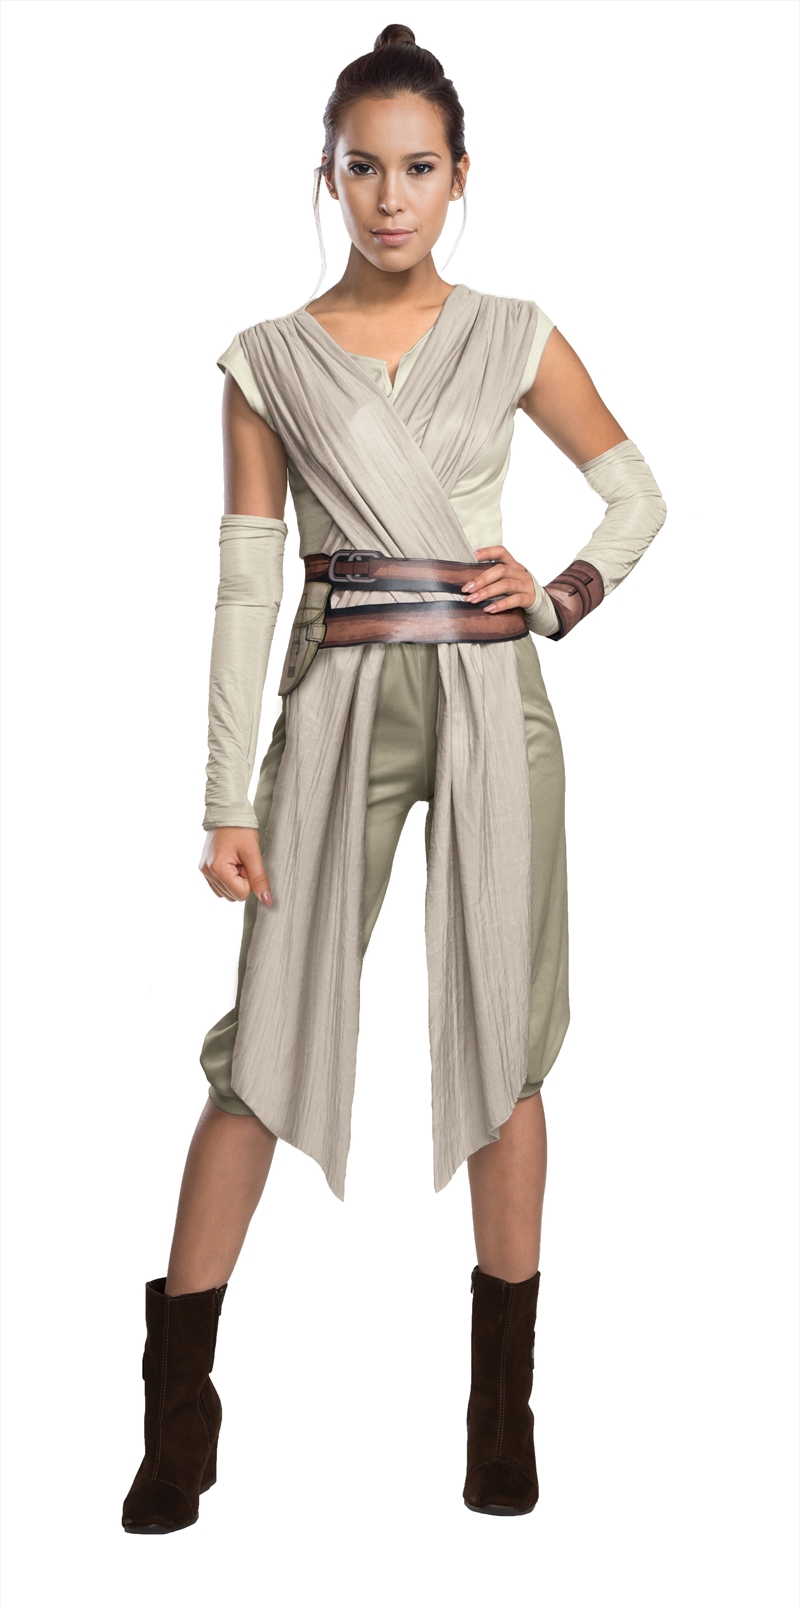 Rey Deluxe Adult Costume - Size L/Product Detail/Costumes